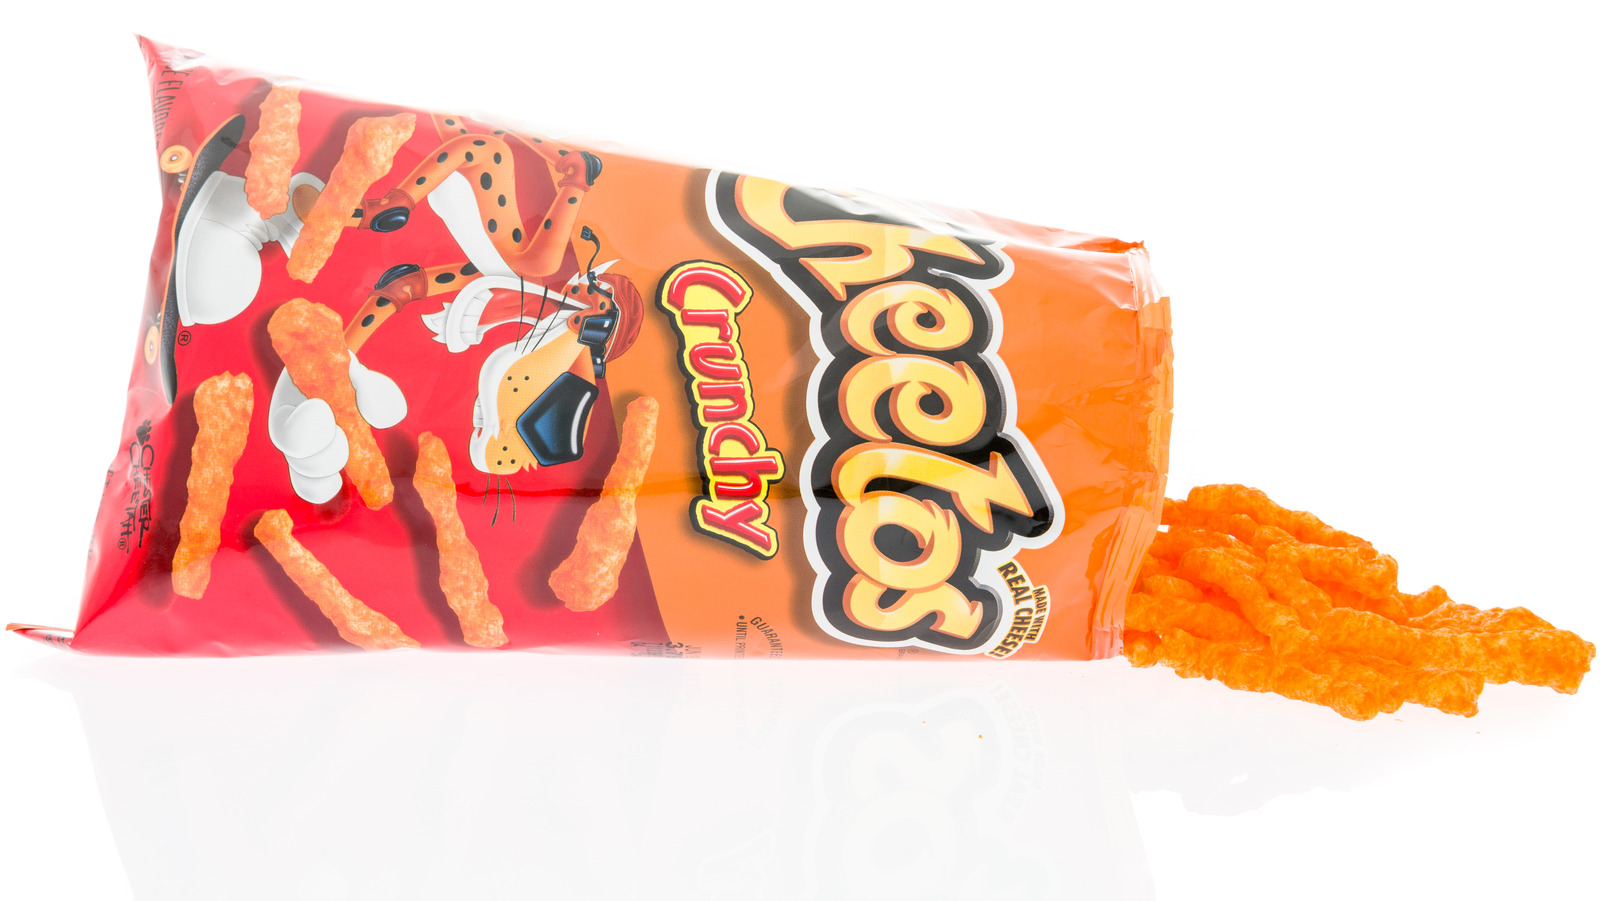 https://www.thedailymeal.com/img/gallery/the-cheetos-alternative-you-need-in-your-life/l-intro-1671596216.jpg